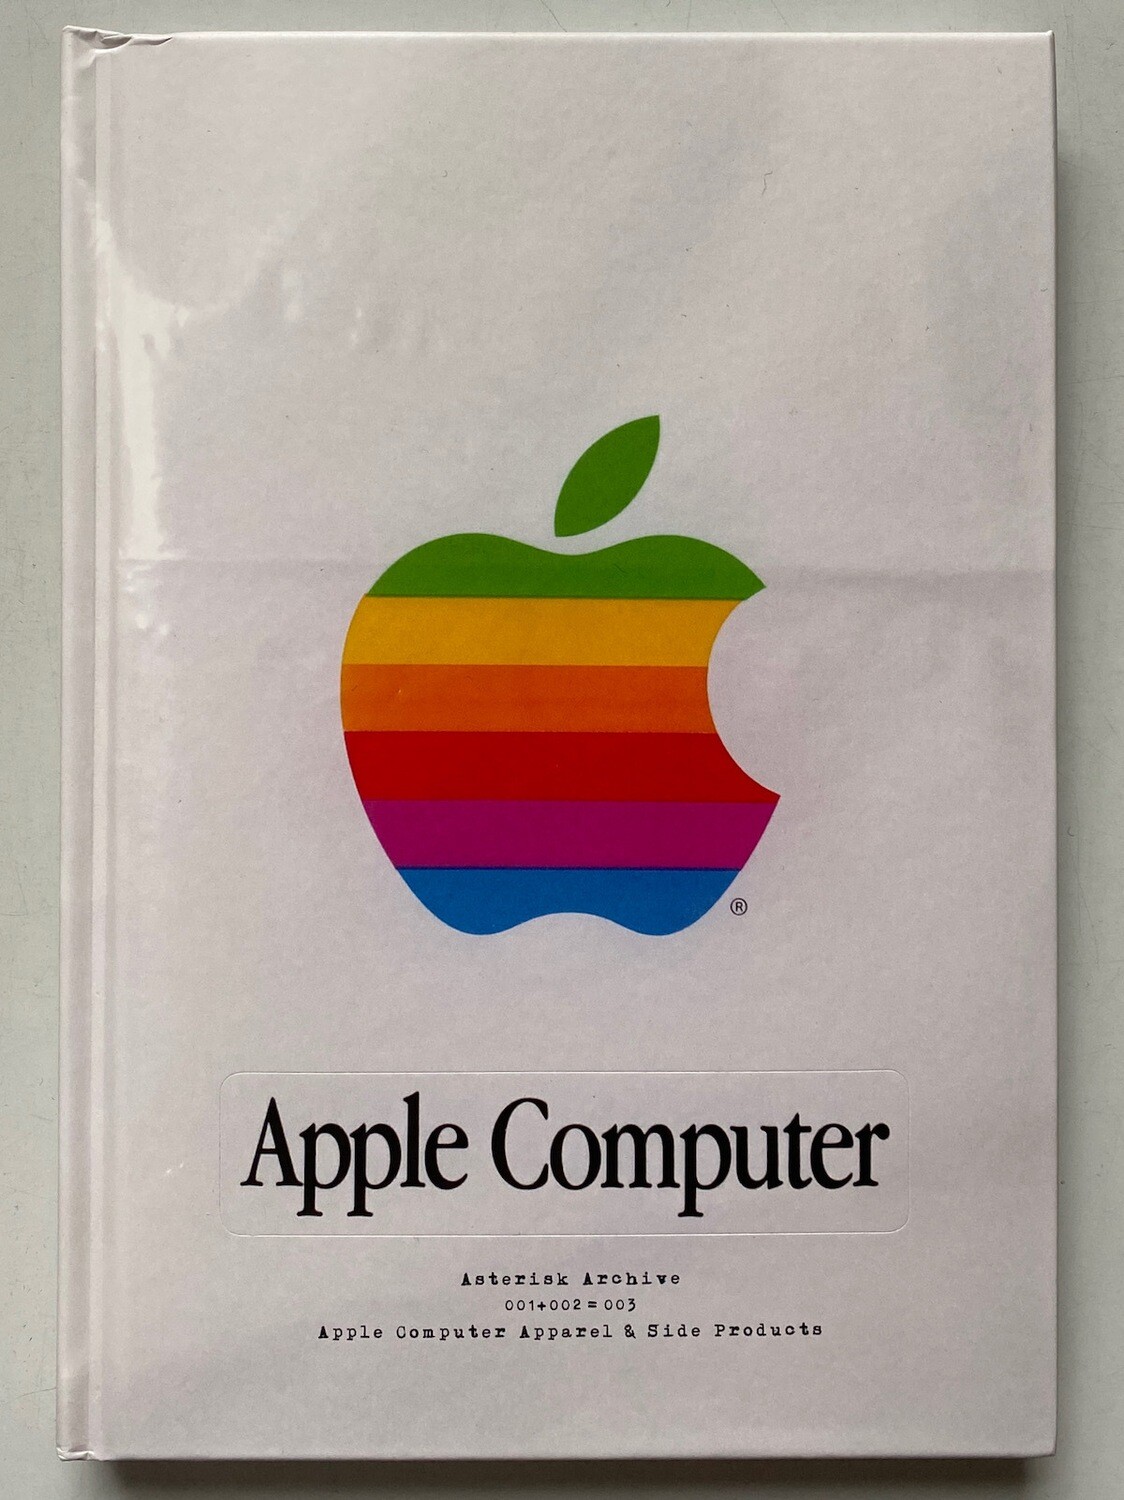 Apple Computer Apparel & Side Products